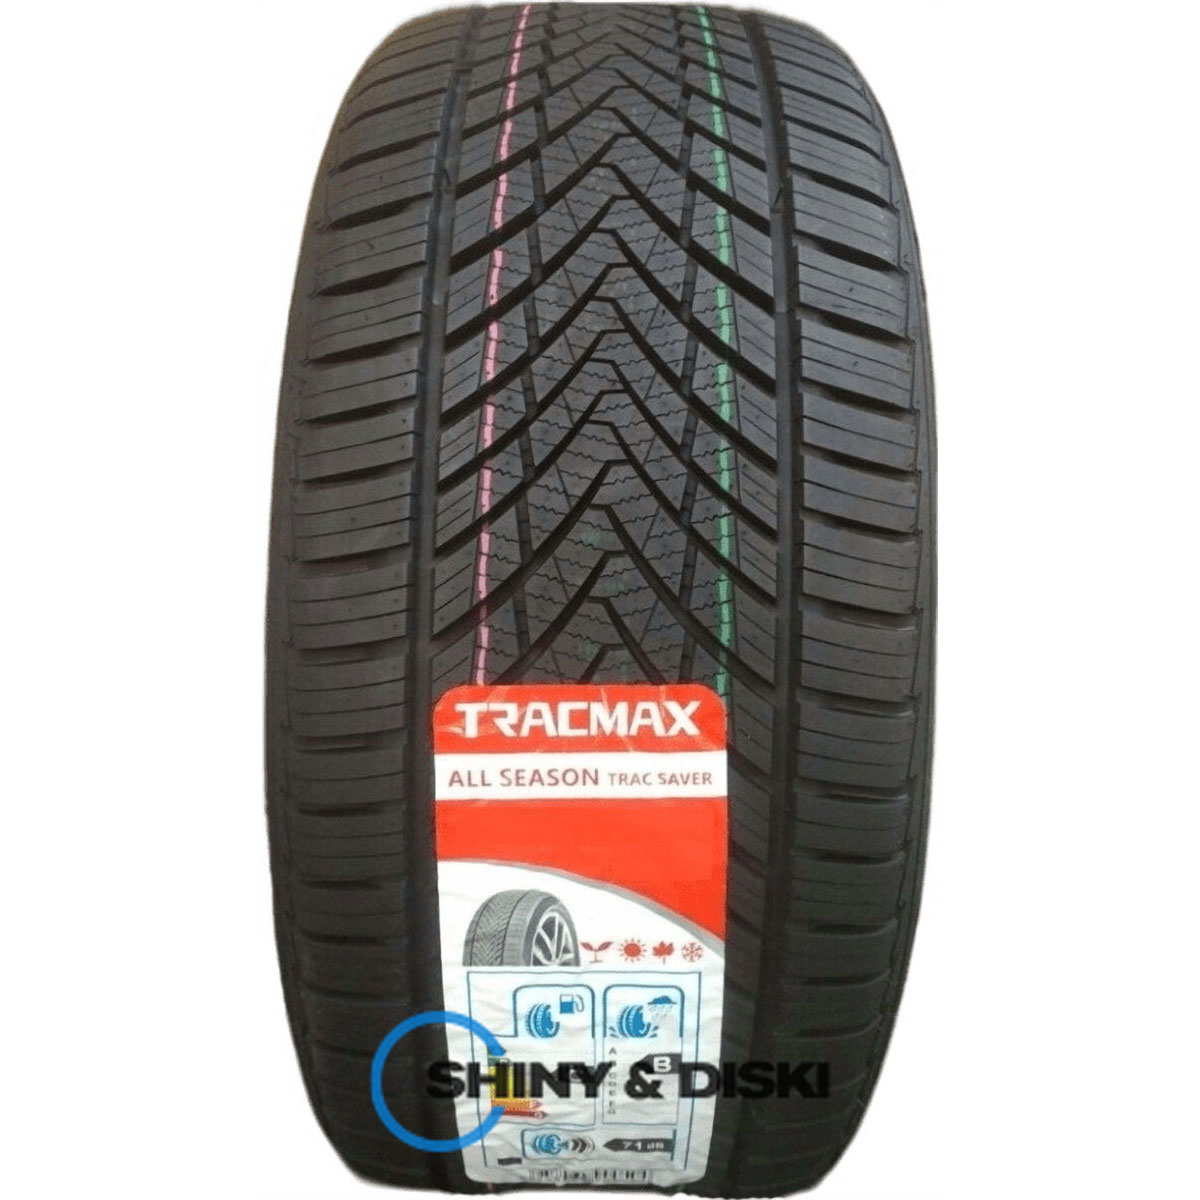 покрышки tracmax a/s trac saver 155/70 r13 75t